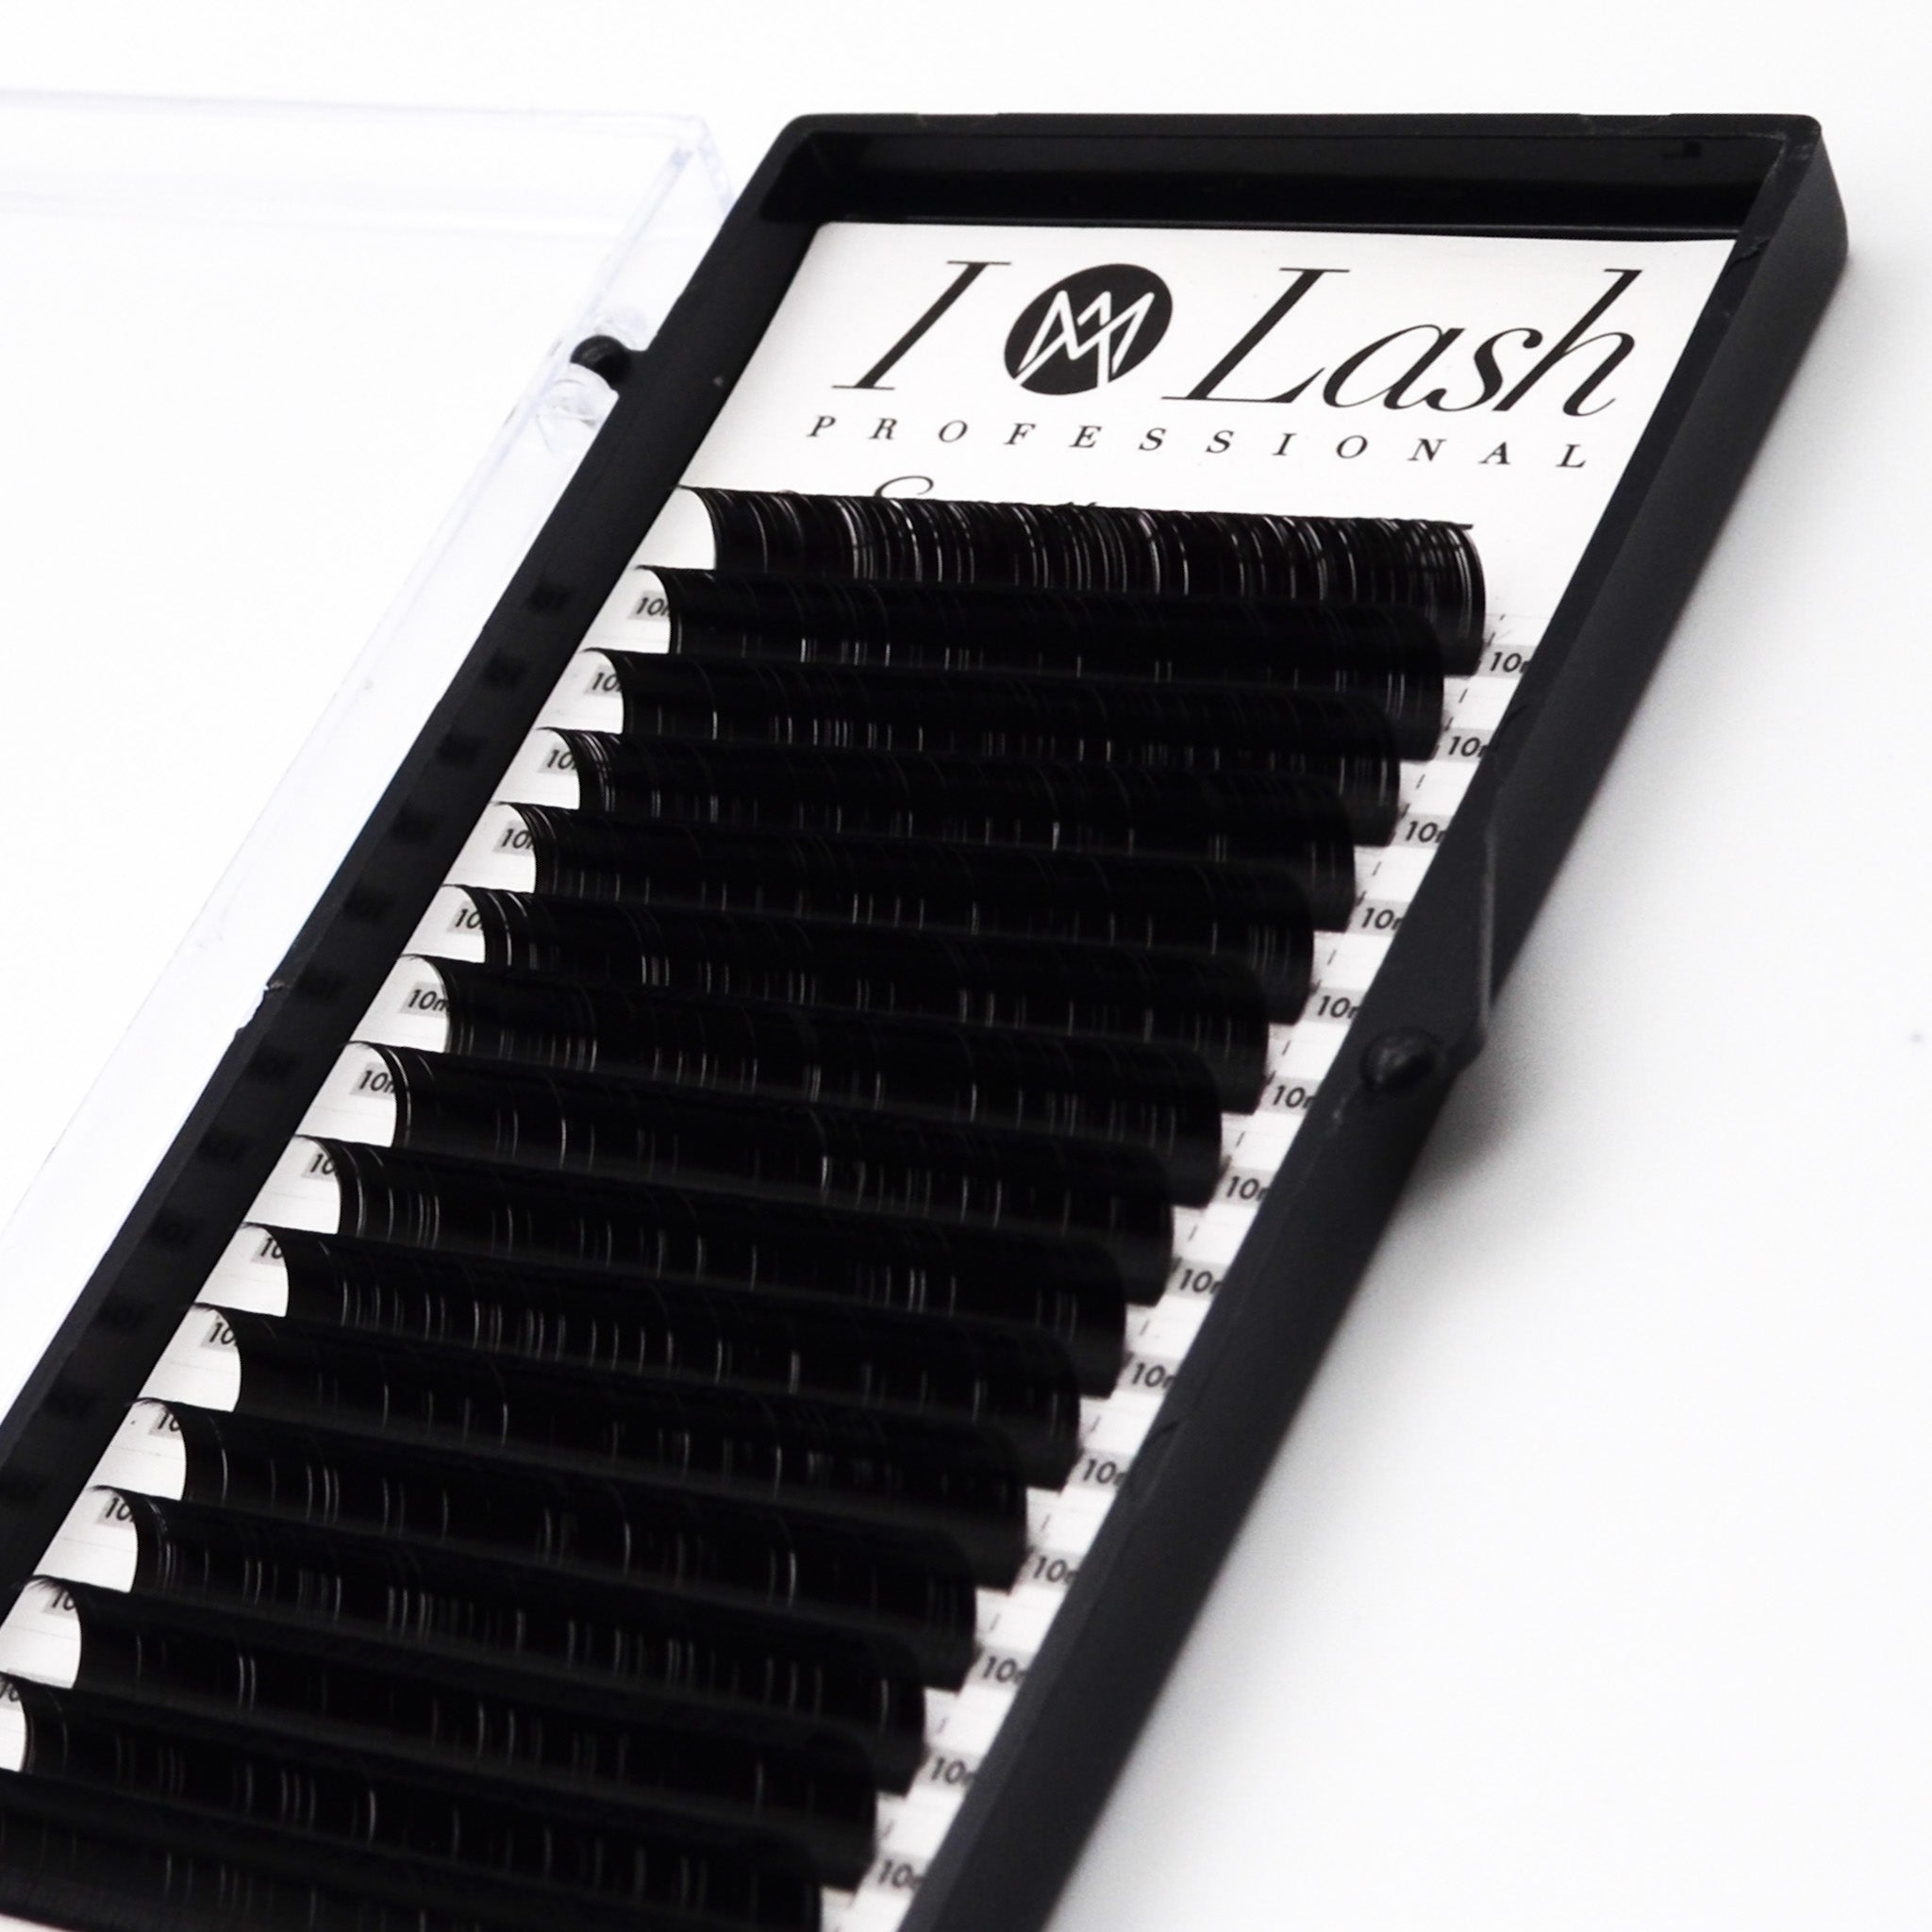 0.05 thickness eyelash extensions. Easy to fan volume lashes.